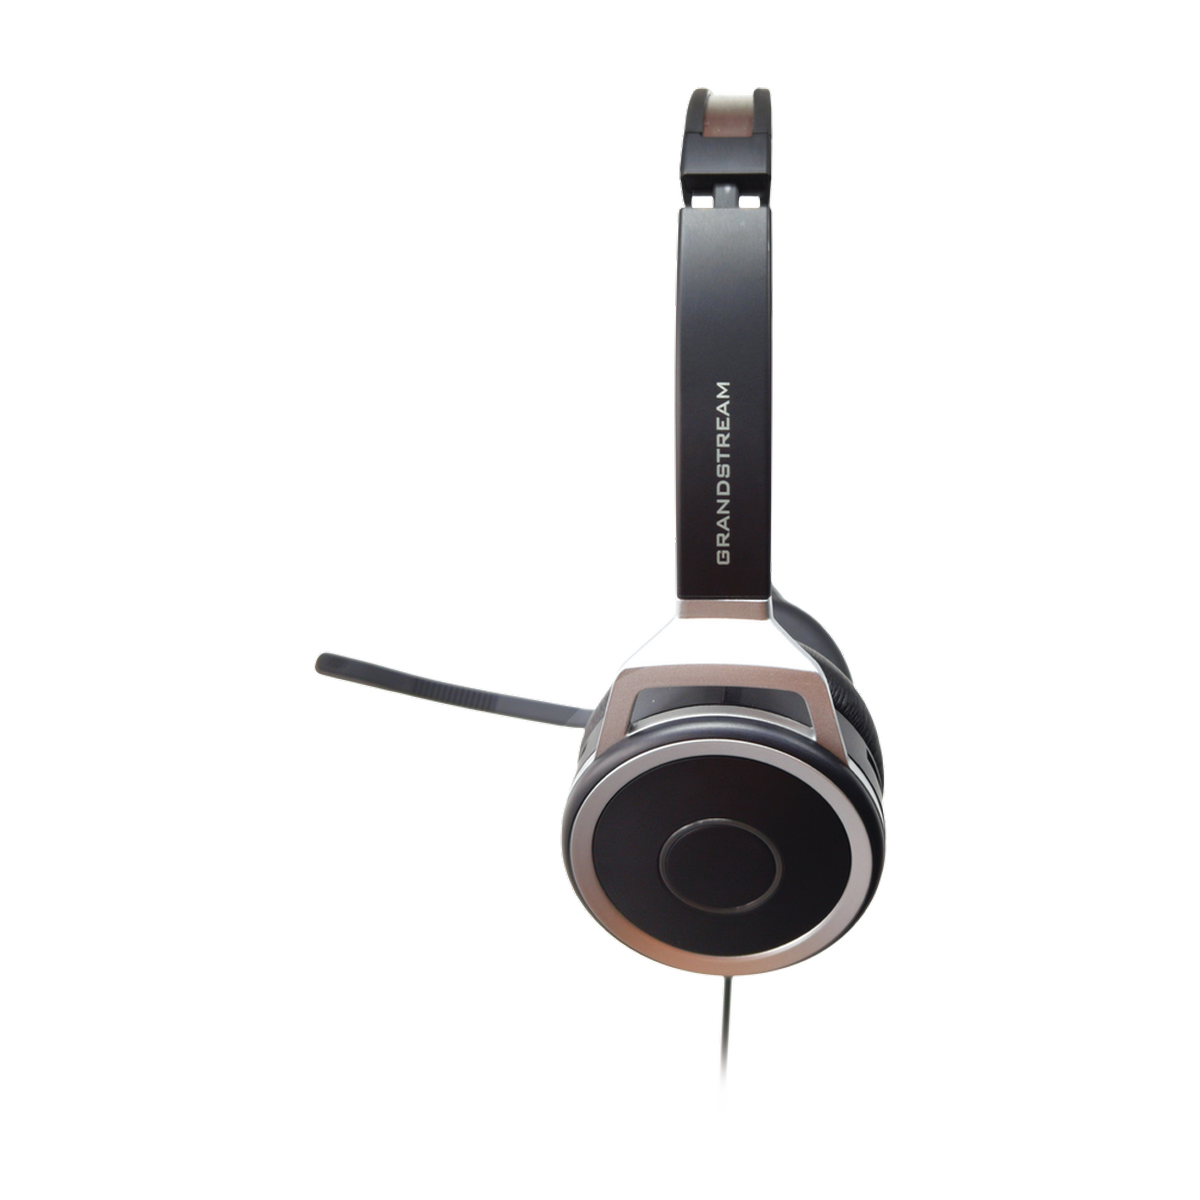 Grandstream-GUV3005-HD-NC-USB-Headset-with-Busyli view a